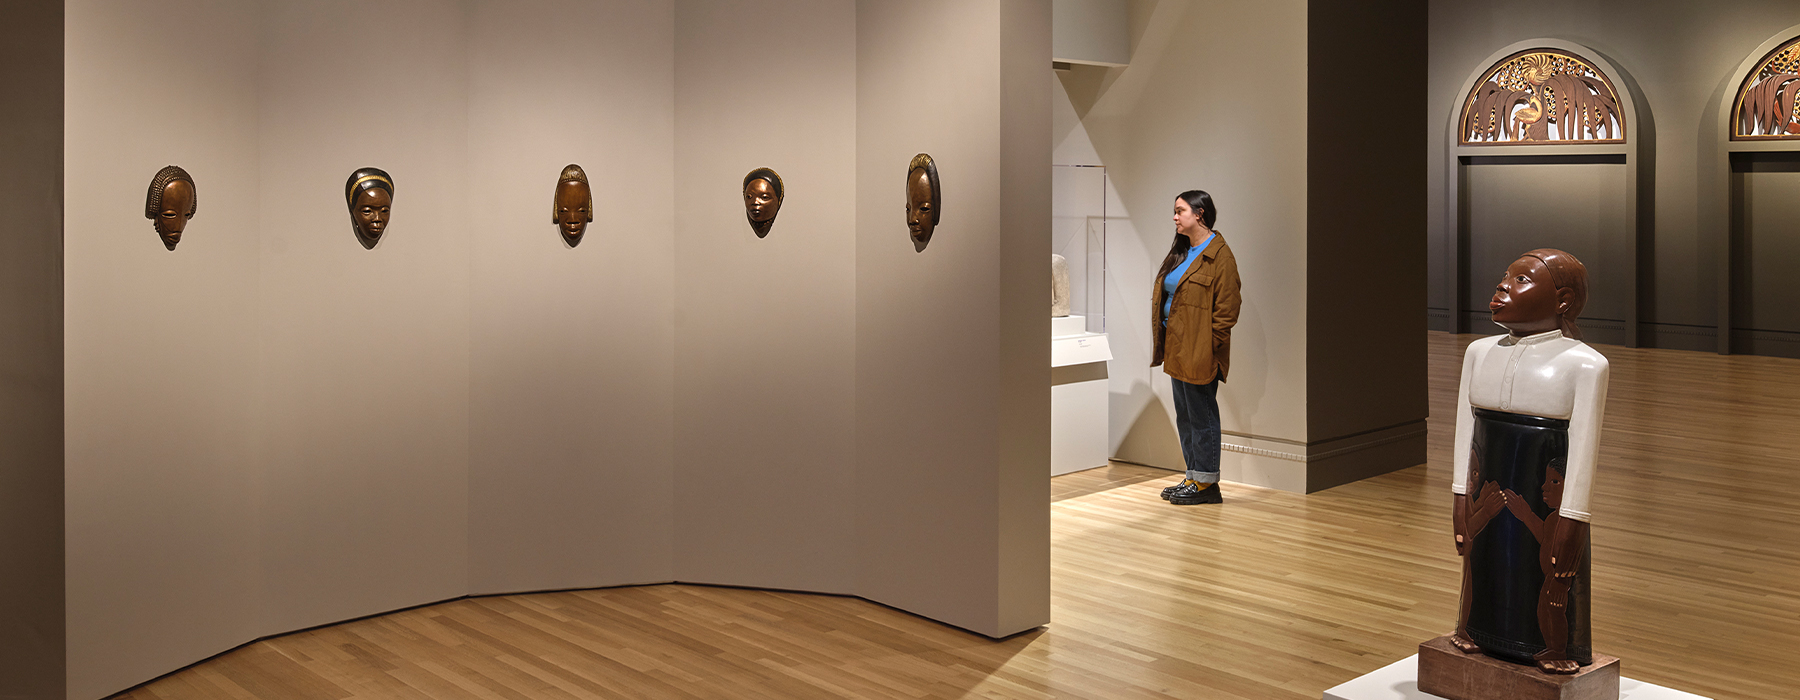 A person stands in a gallery filled with sculptures.